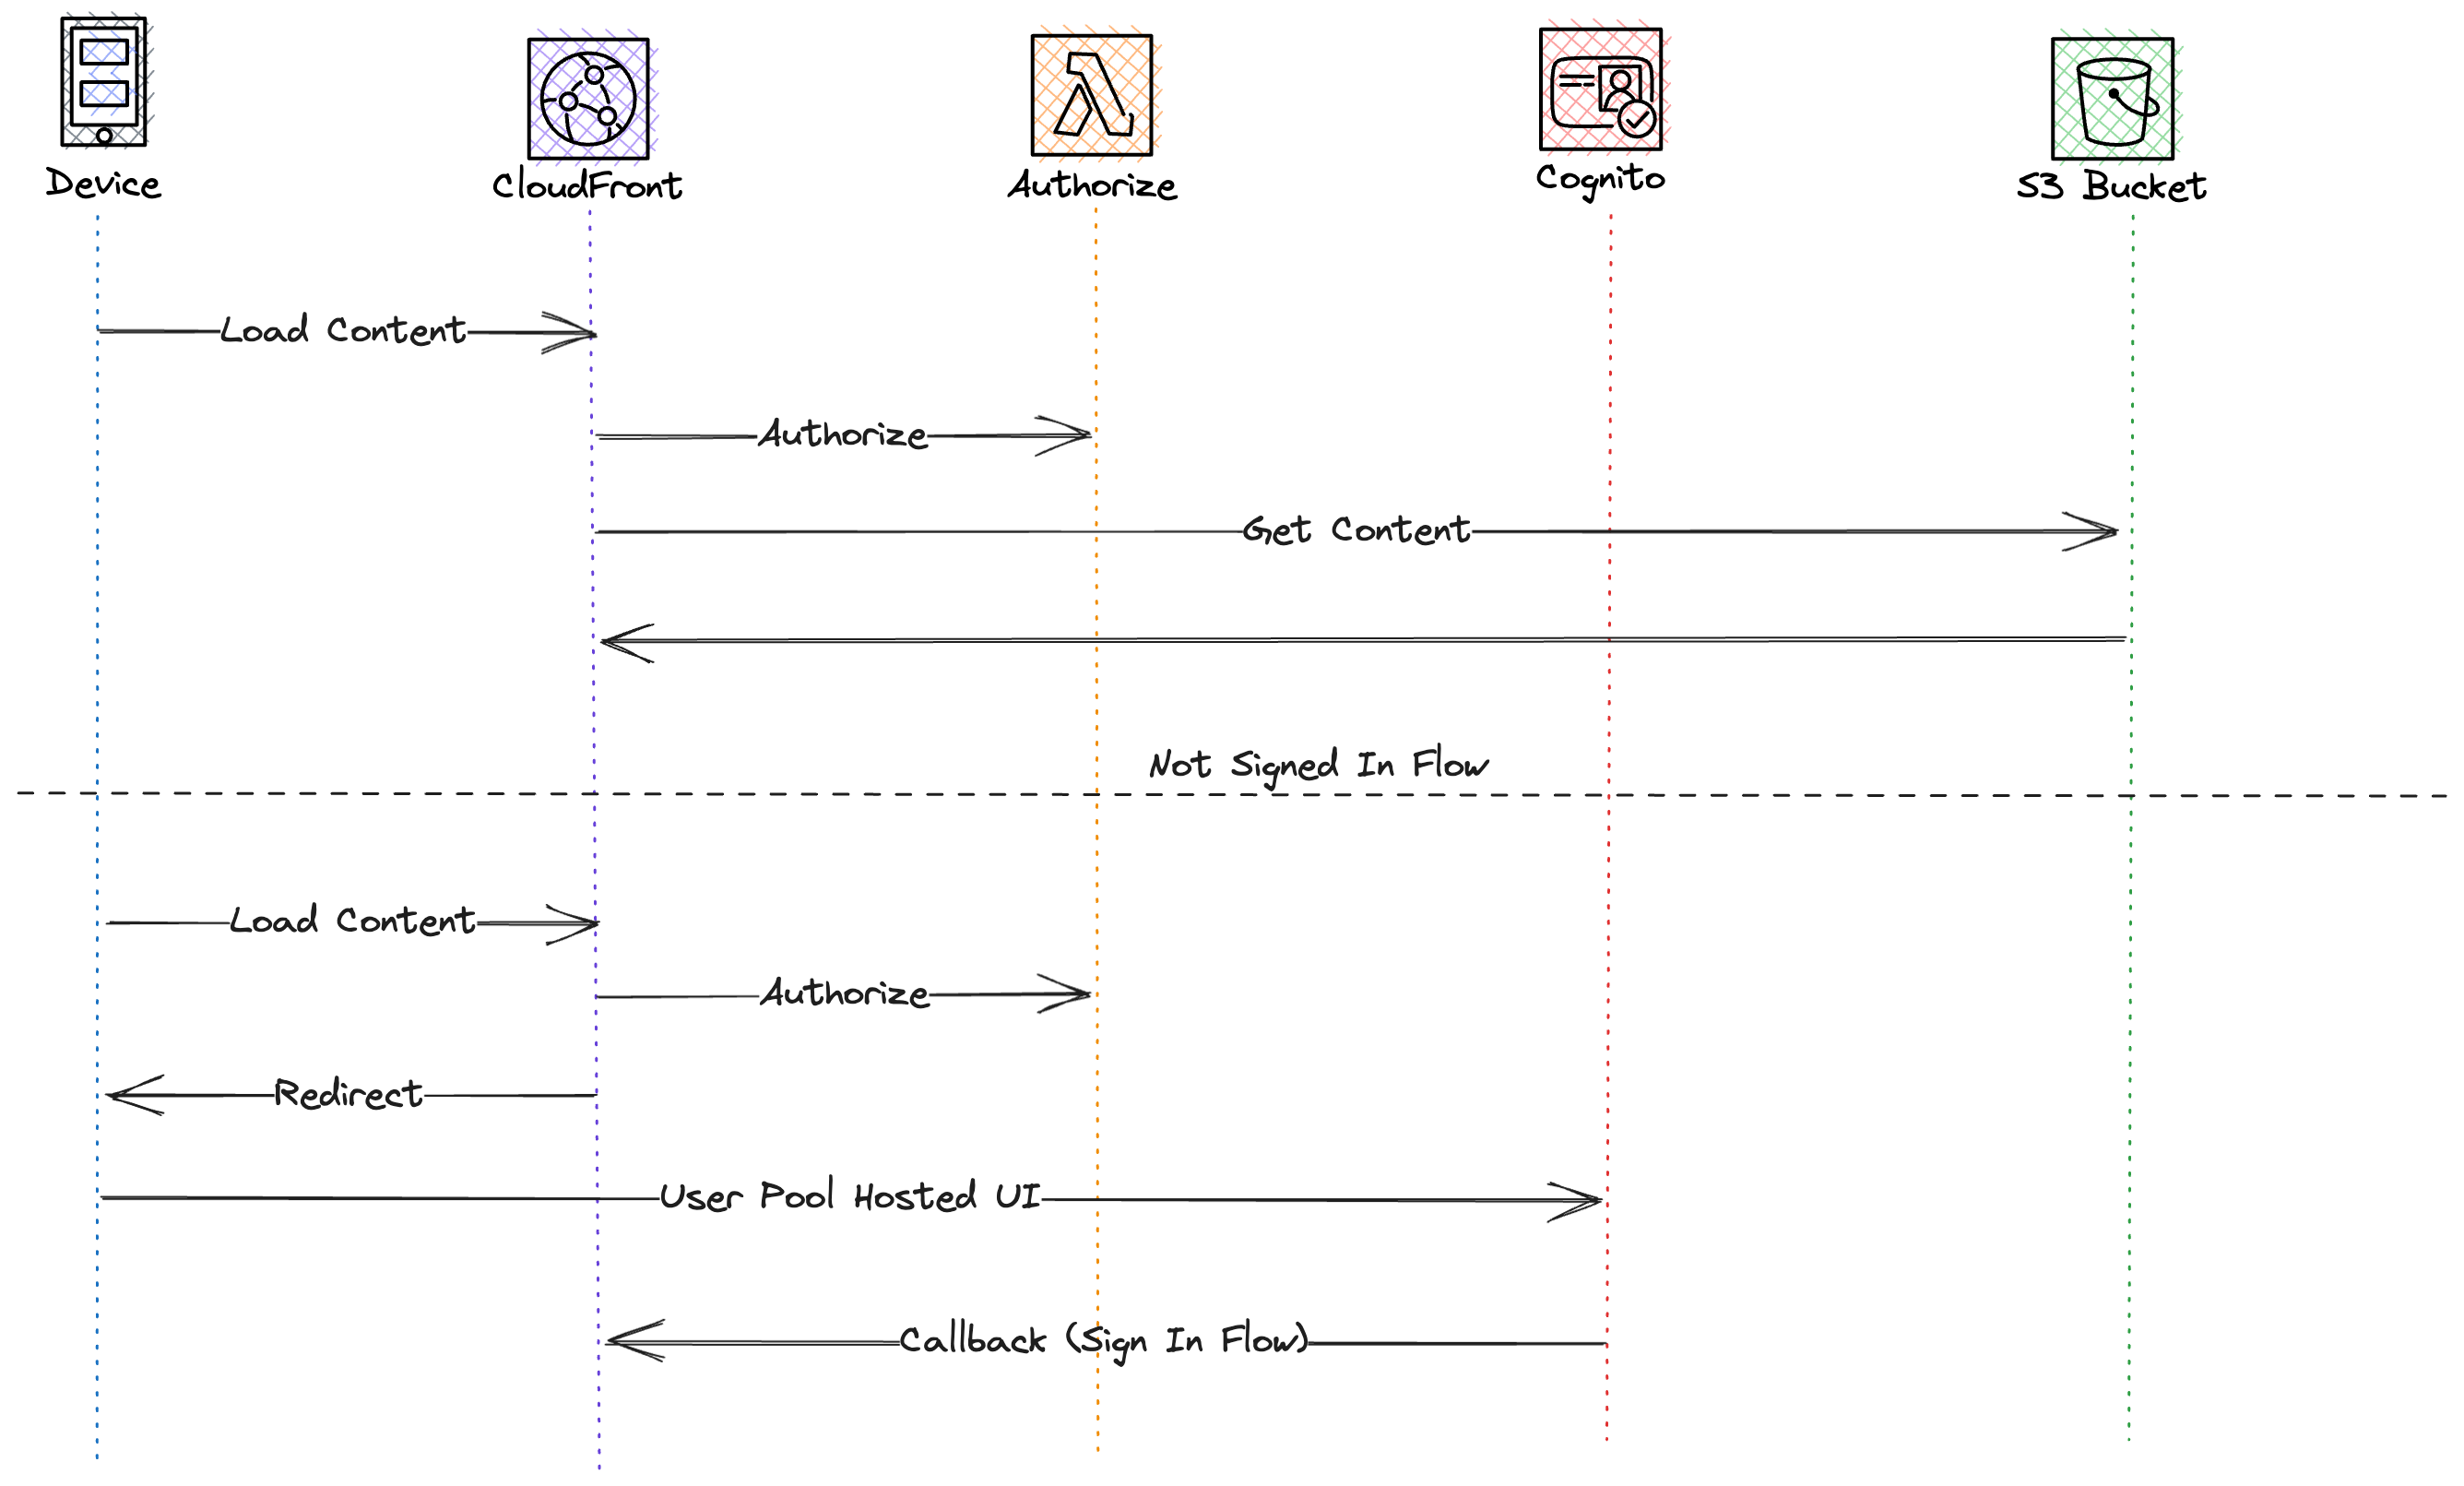 Image showing the authorization flow.